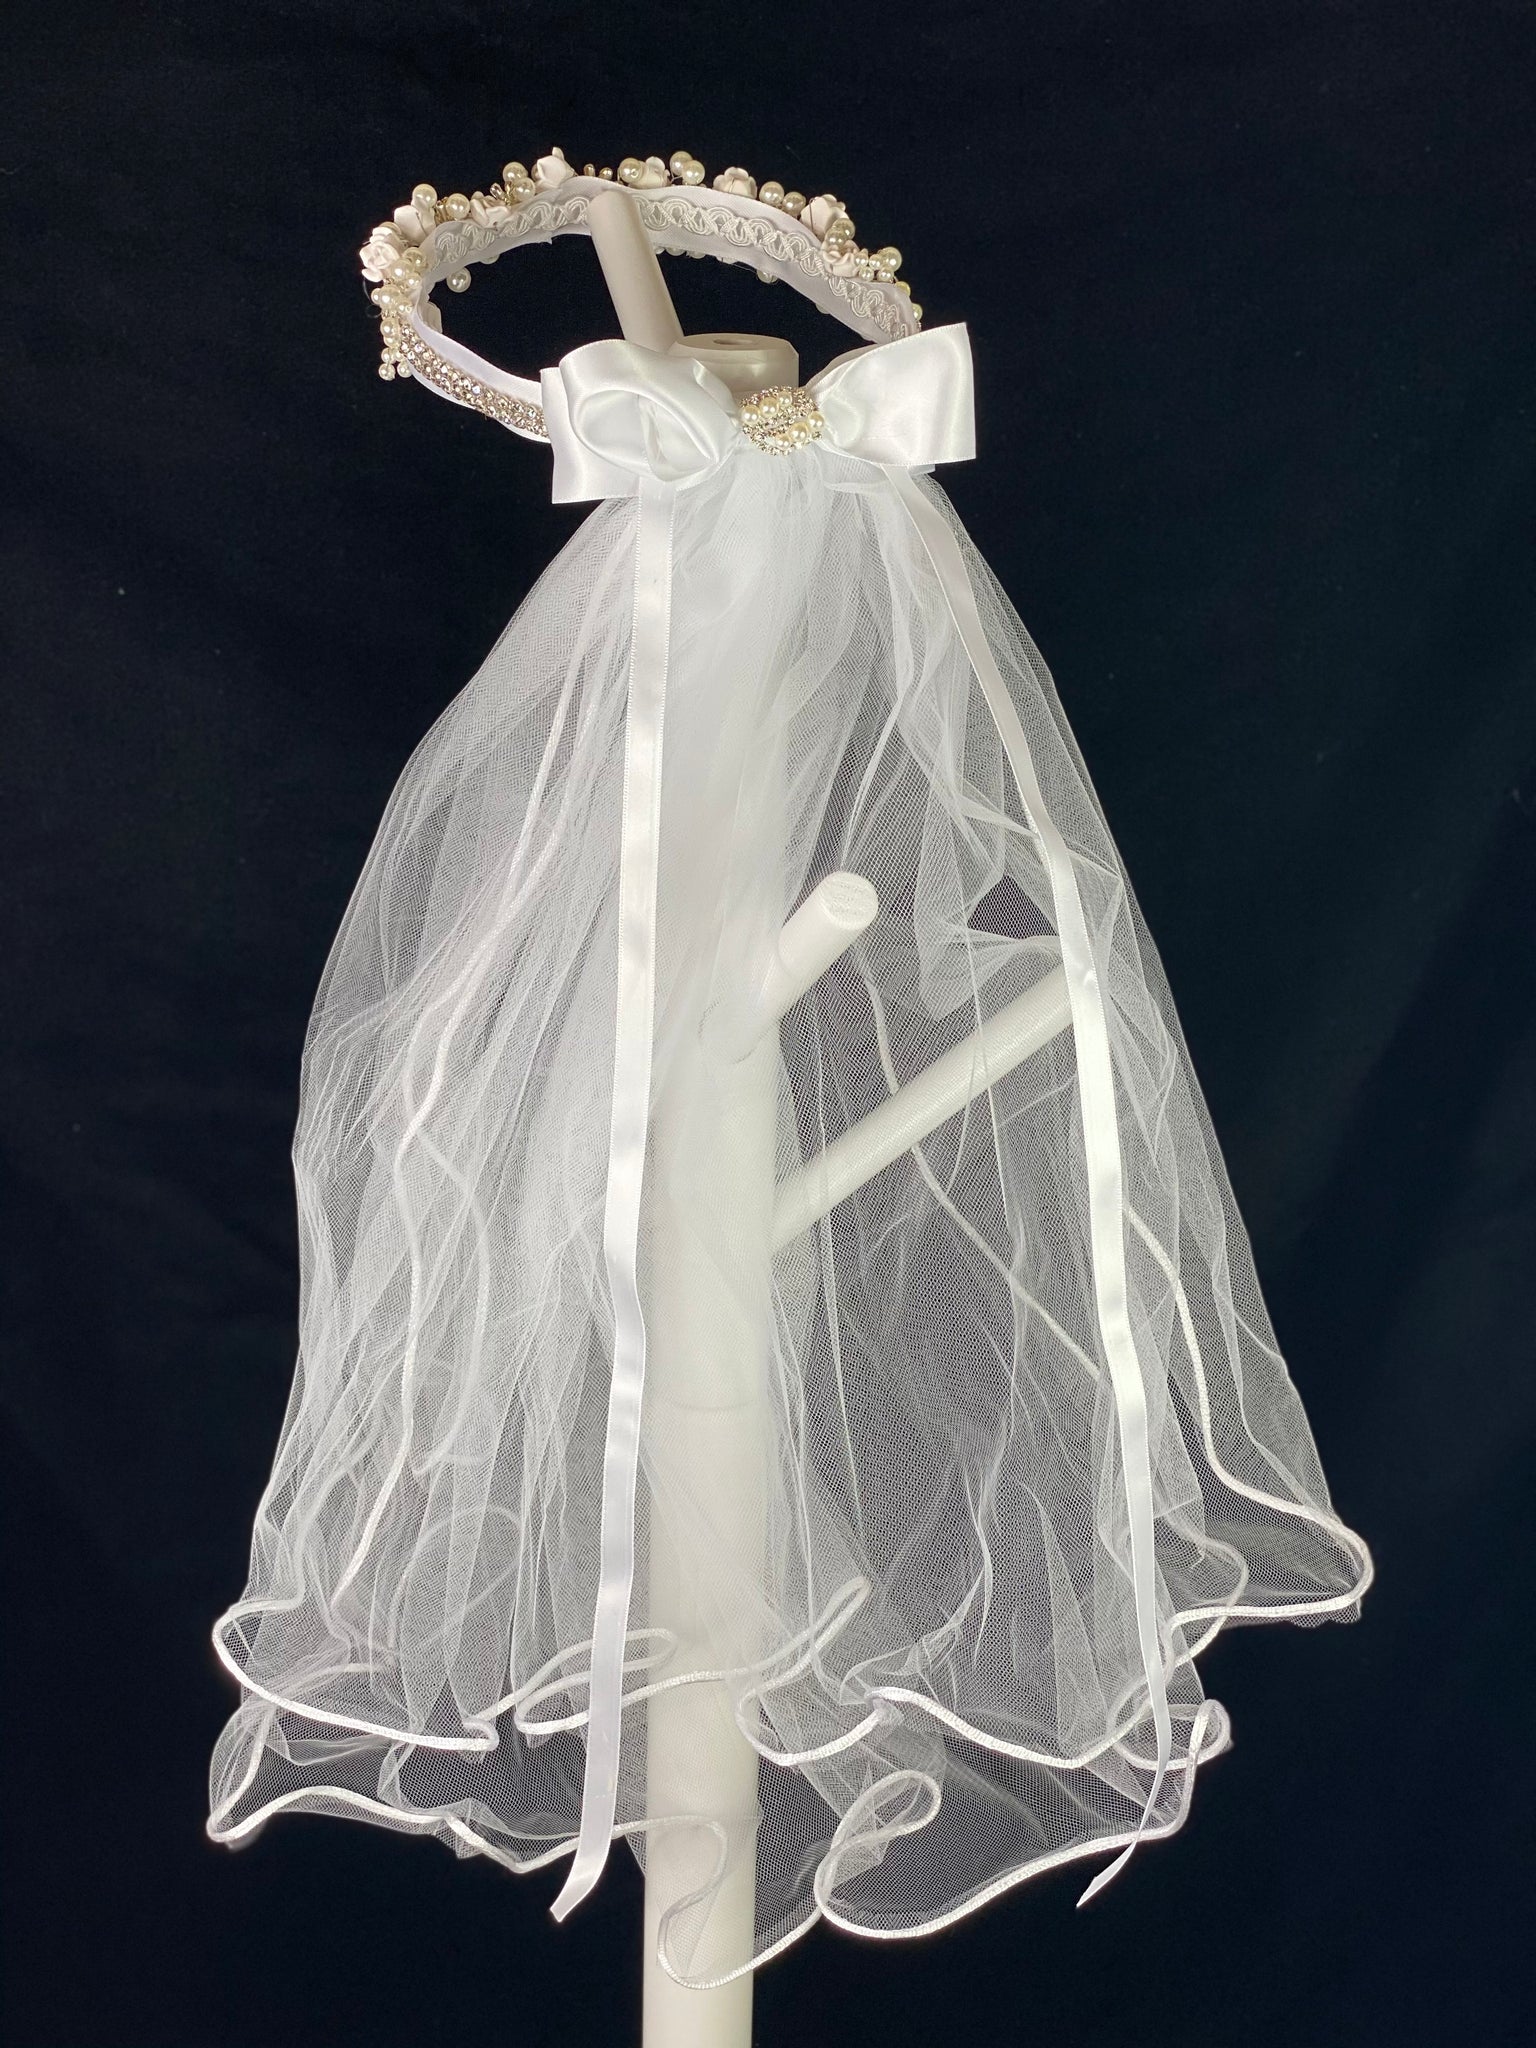 Elegant soft 2 layer tulle veil with delicate hand stitched braided satin trim around the edge and handmade flower halo crown with veil with large white satin bow on back. Ivory roses with rhinestone centers throughout crown band.  Beautiful rhinestone flowers with pearl detailing around crown band.  Rhinestone band around back side of crown.   This double layered veil reaches approximately 24" long, with a crown diameter of 6". Veil has 2" long, 3" wide, comb to secure it in place. 